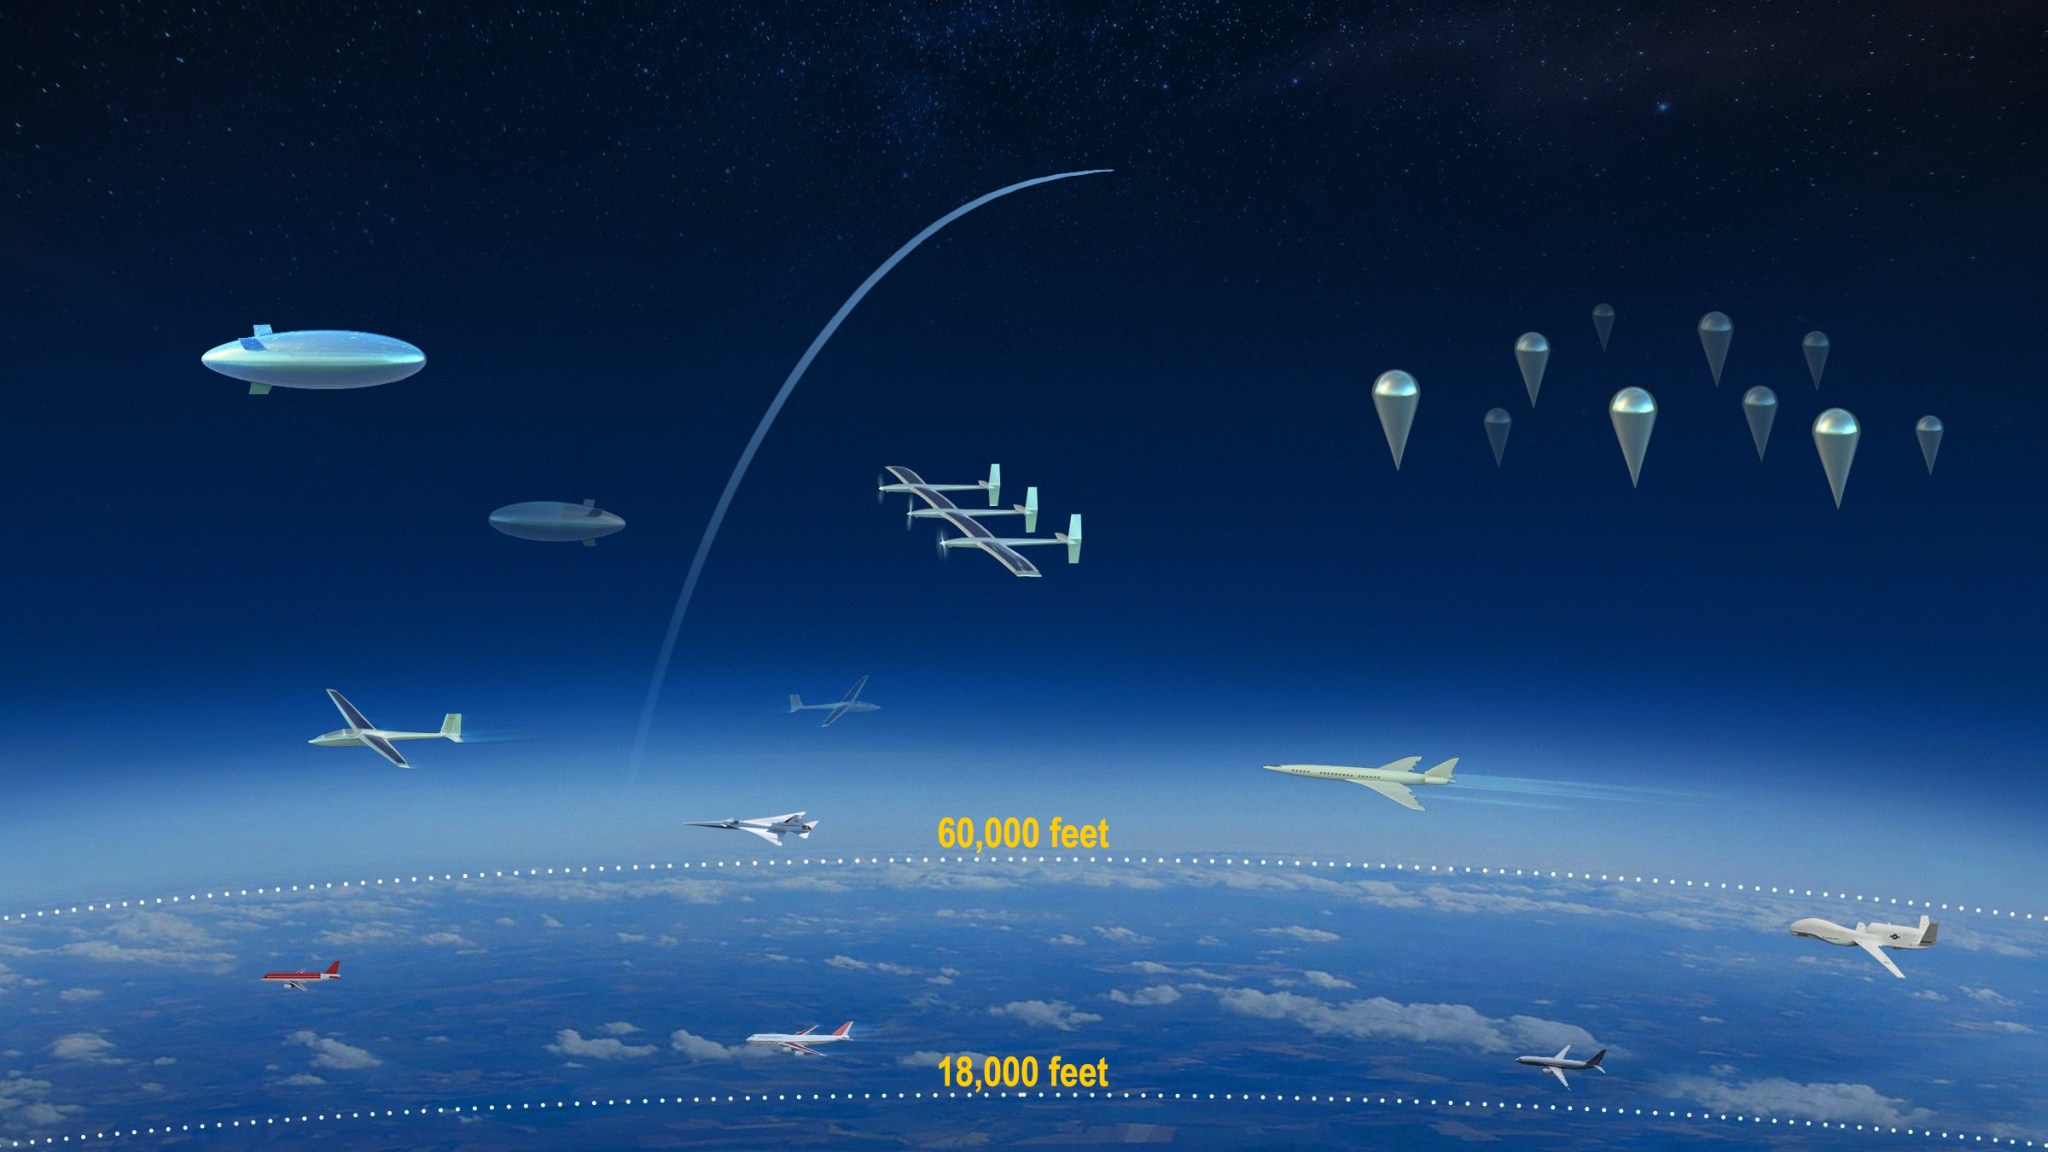 Graphic of Earth's atmosphere showing the various vehicles at 18,000 feet in the air and 60,000 feet in the air.